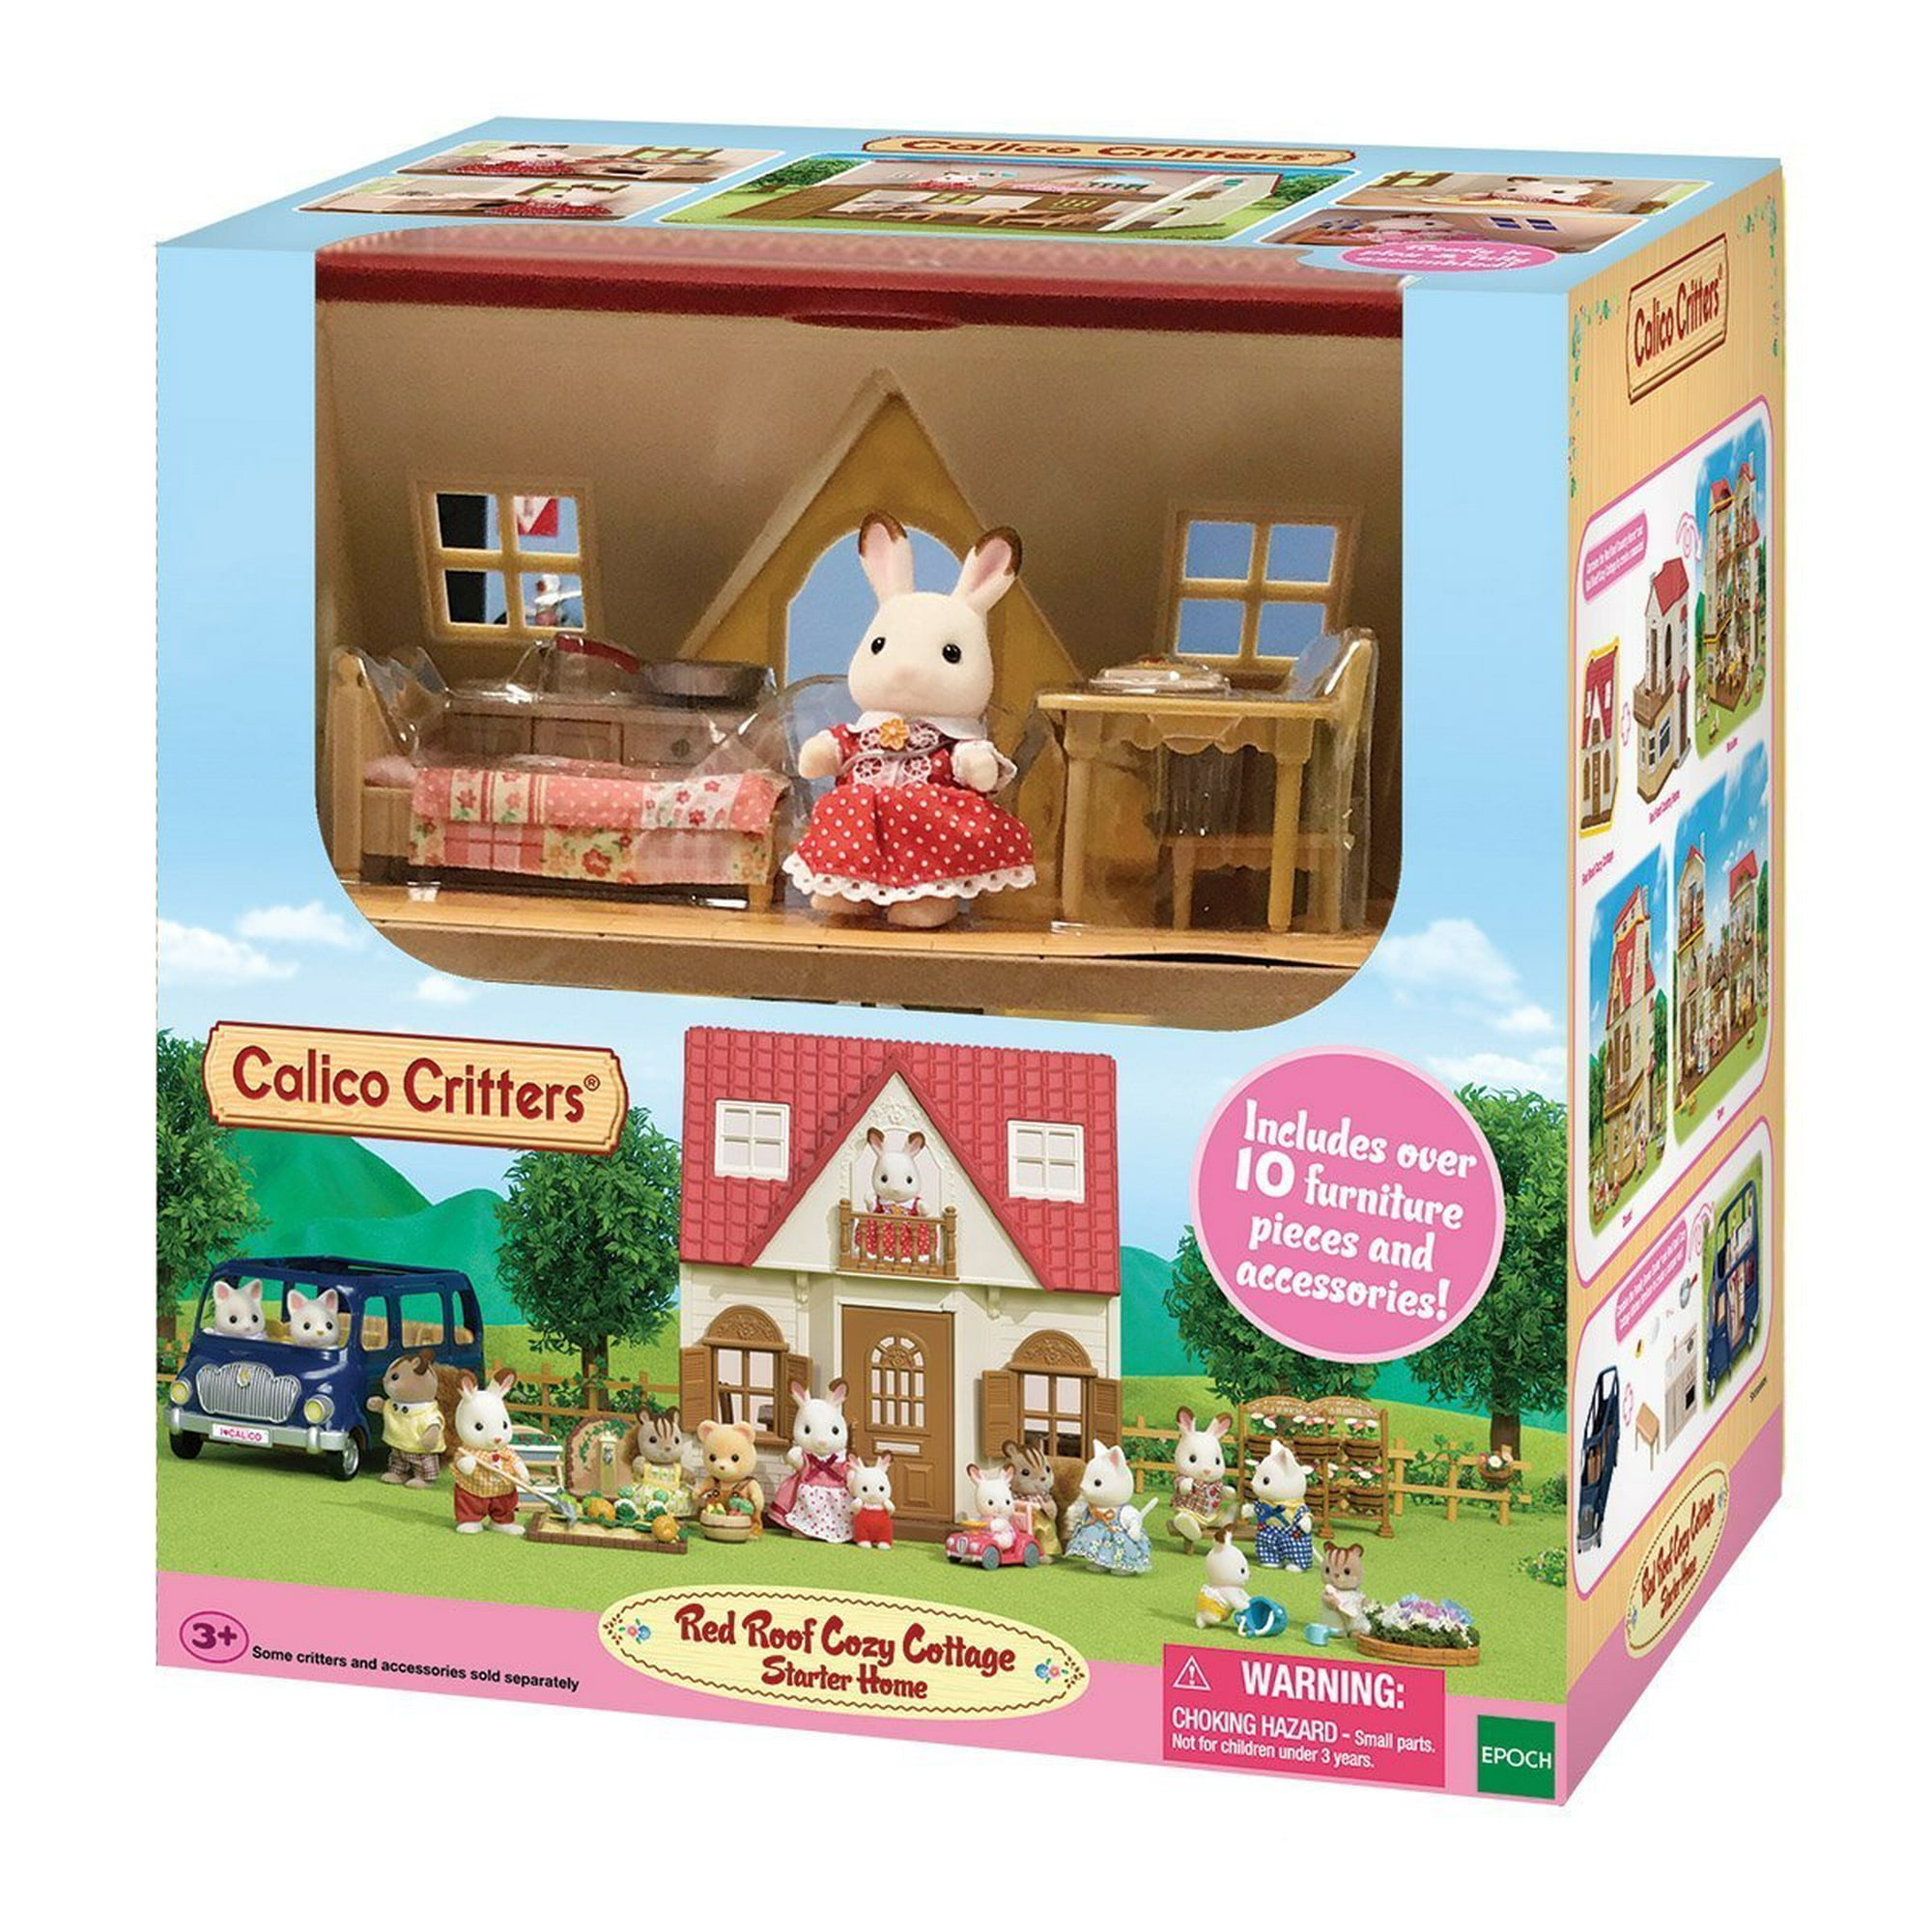 Calico Critters Cc1798 Red Roof Cozy Cottage Starter Home